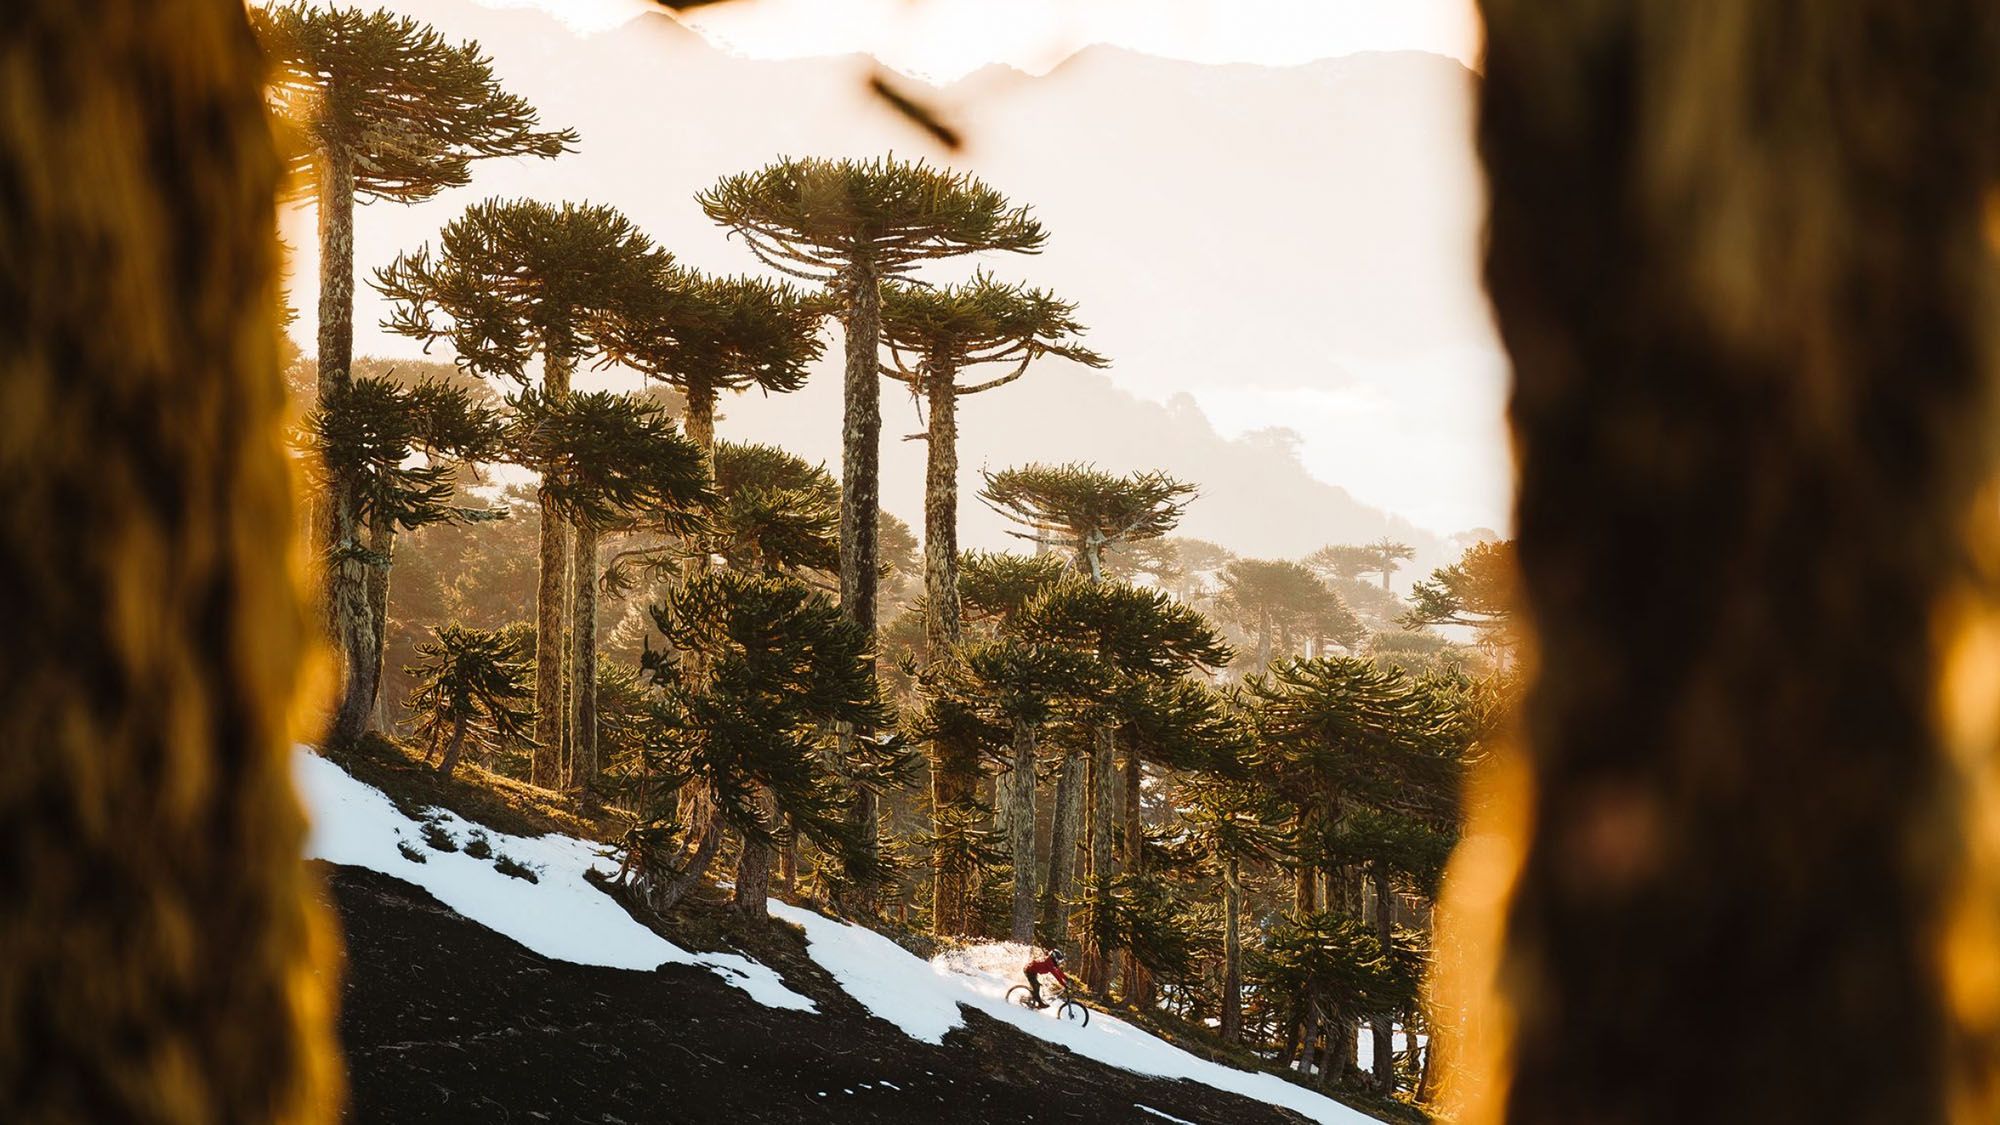 Lost in Chile feat. Andreu Lacondeguy